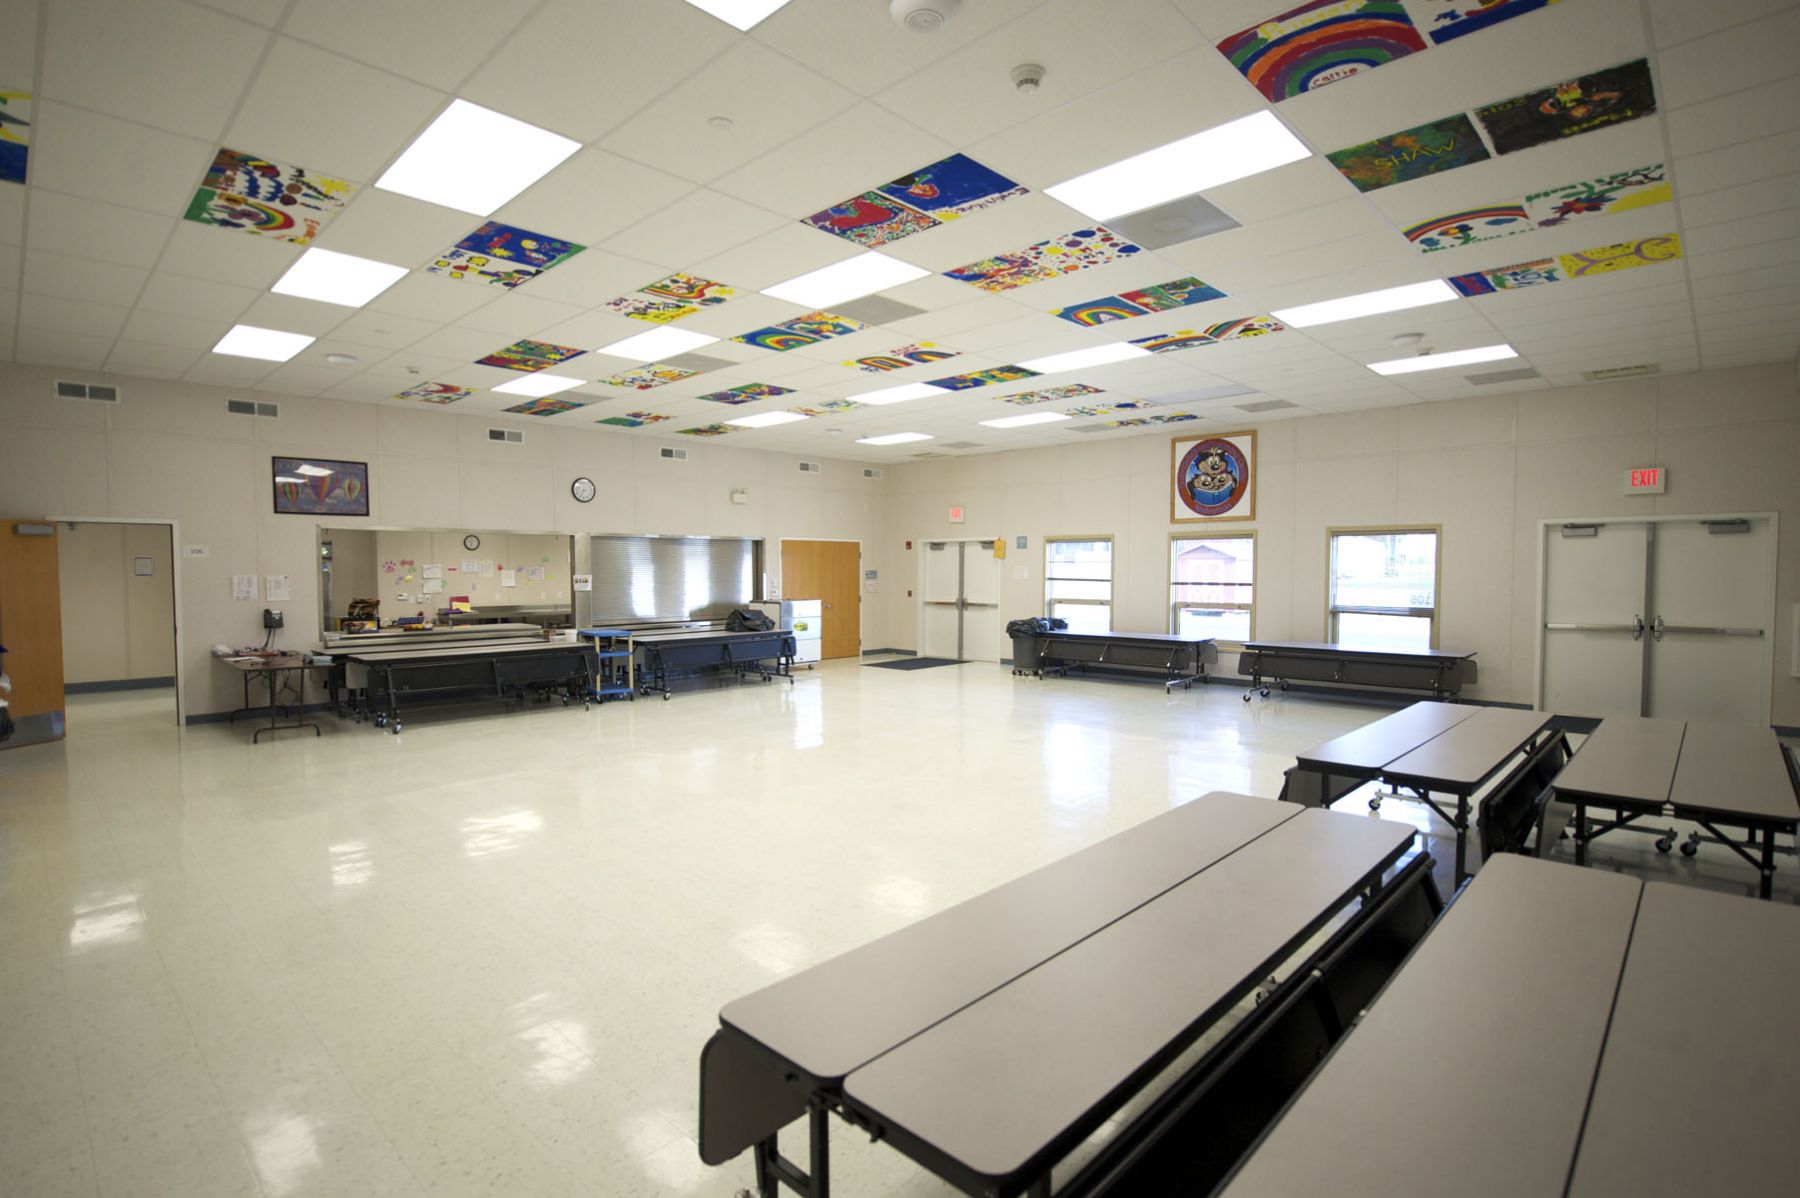 Woodstown-Pilesgrove-Permanent-Modular-Learning-Center-Cafeteria